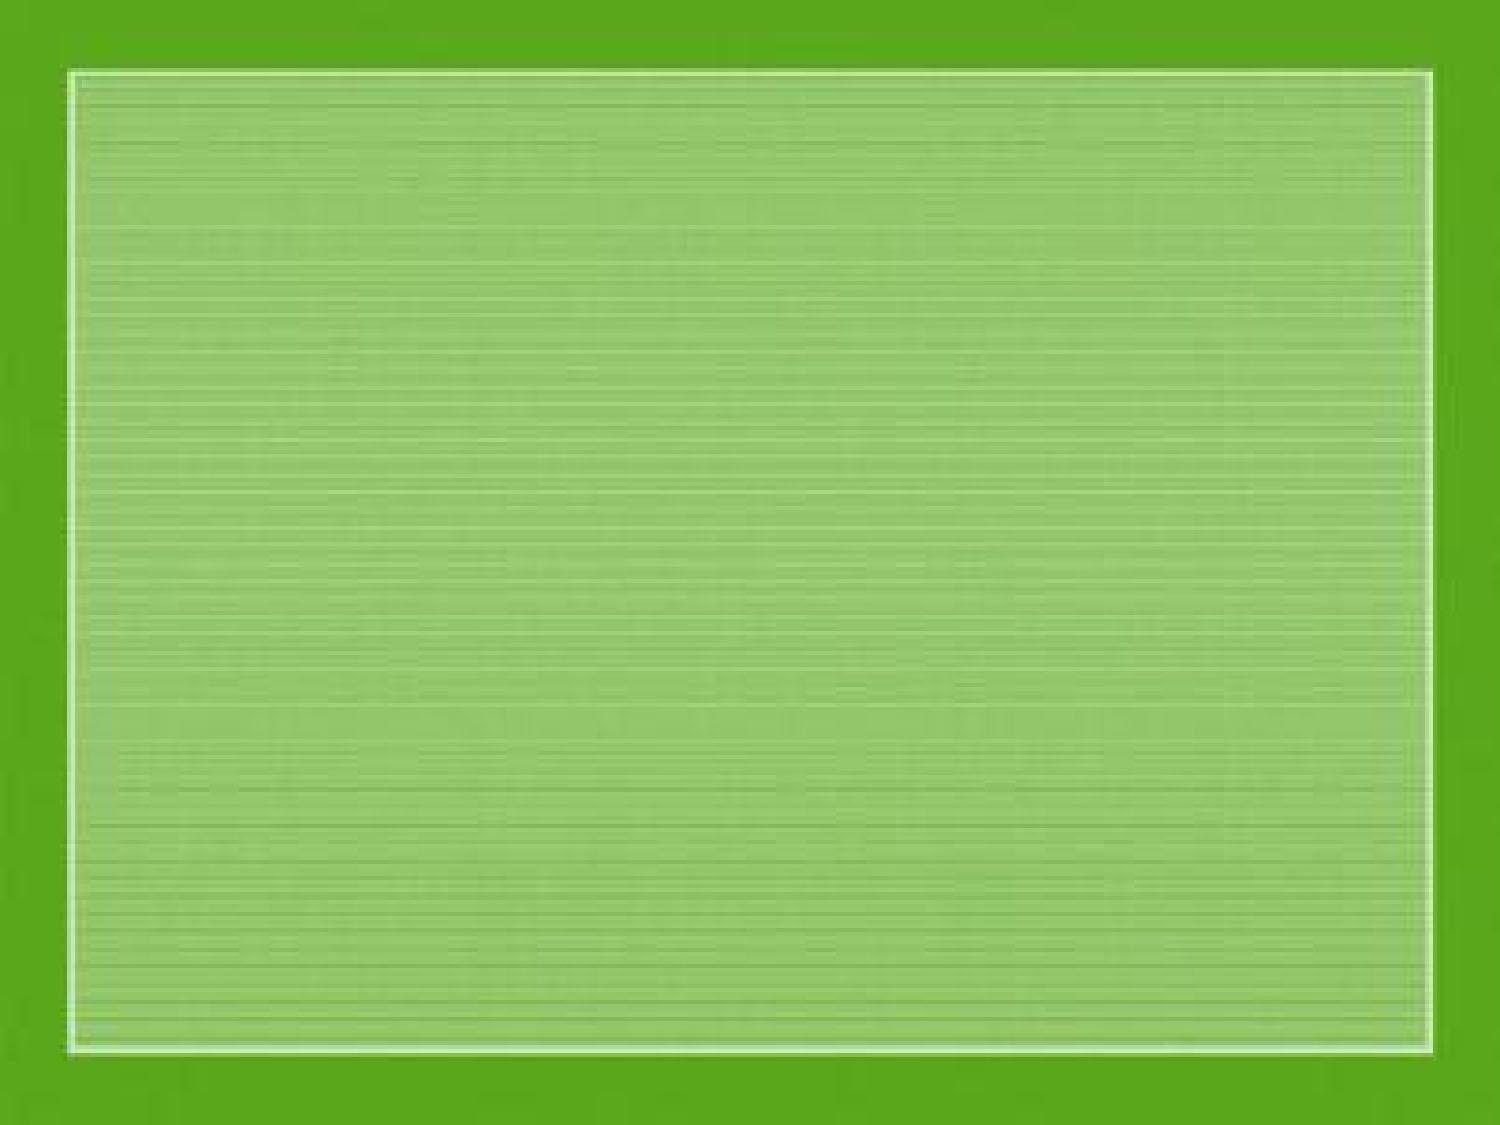 Simple Green Frame Free PPT Background for your PowerPoint